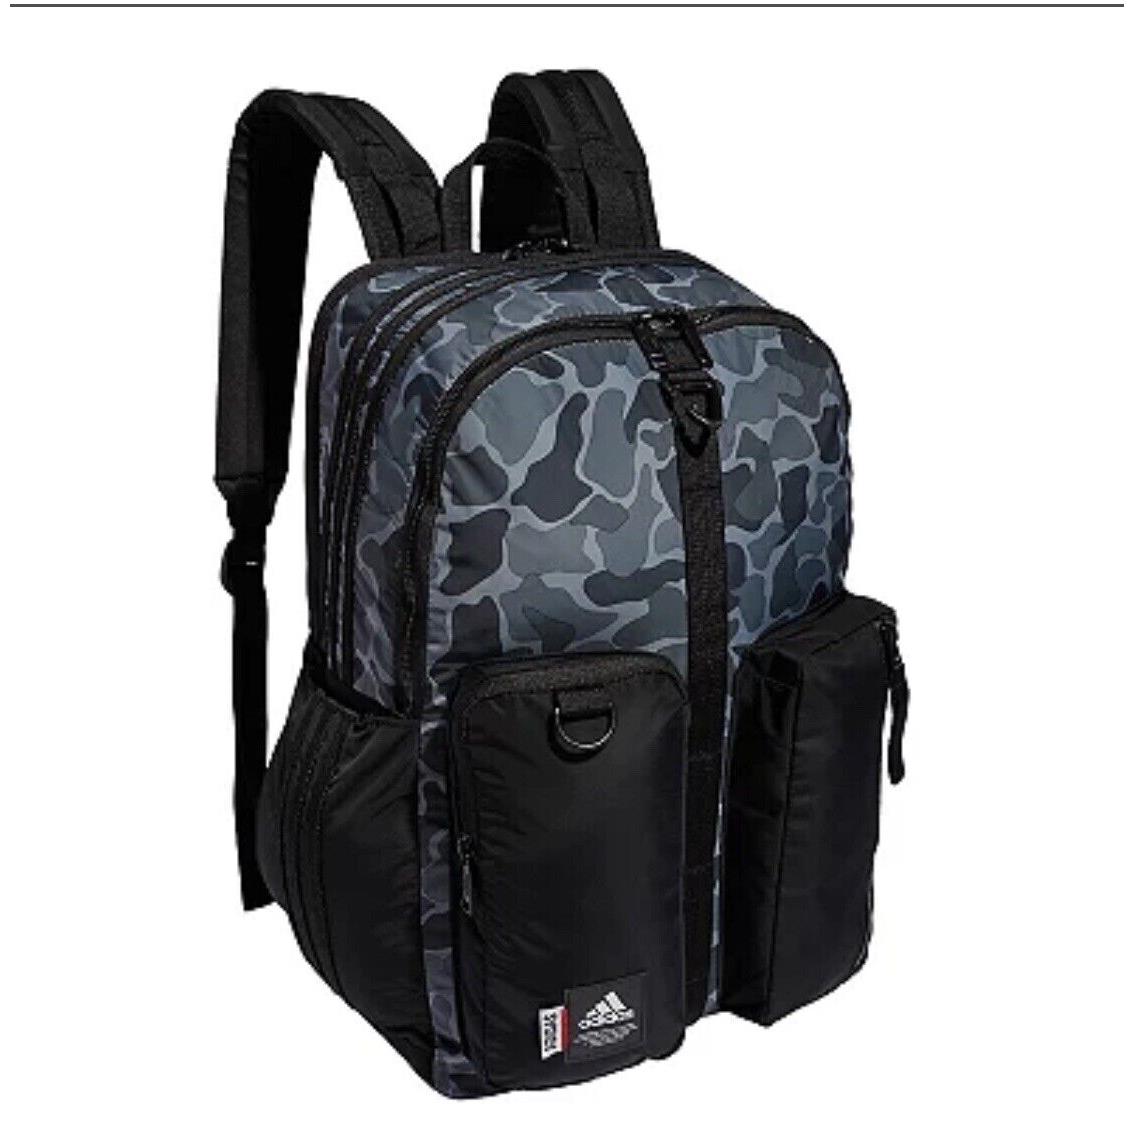 Adidas Backpack Full Size Bag 18.5 In. Black Nomad Camo 3 Stripe Fits Laptop